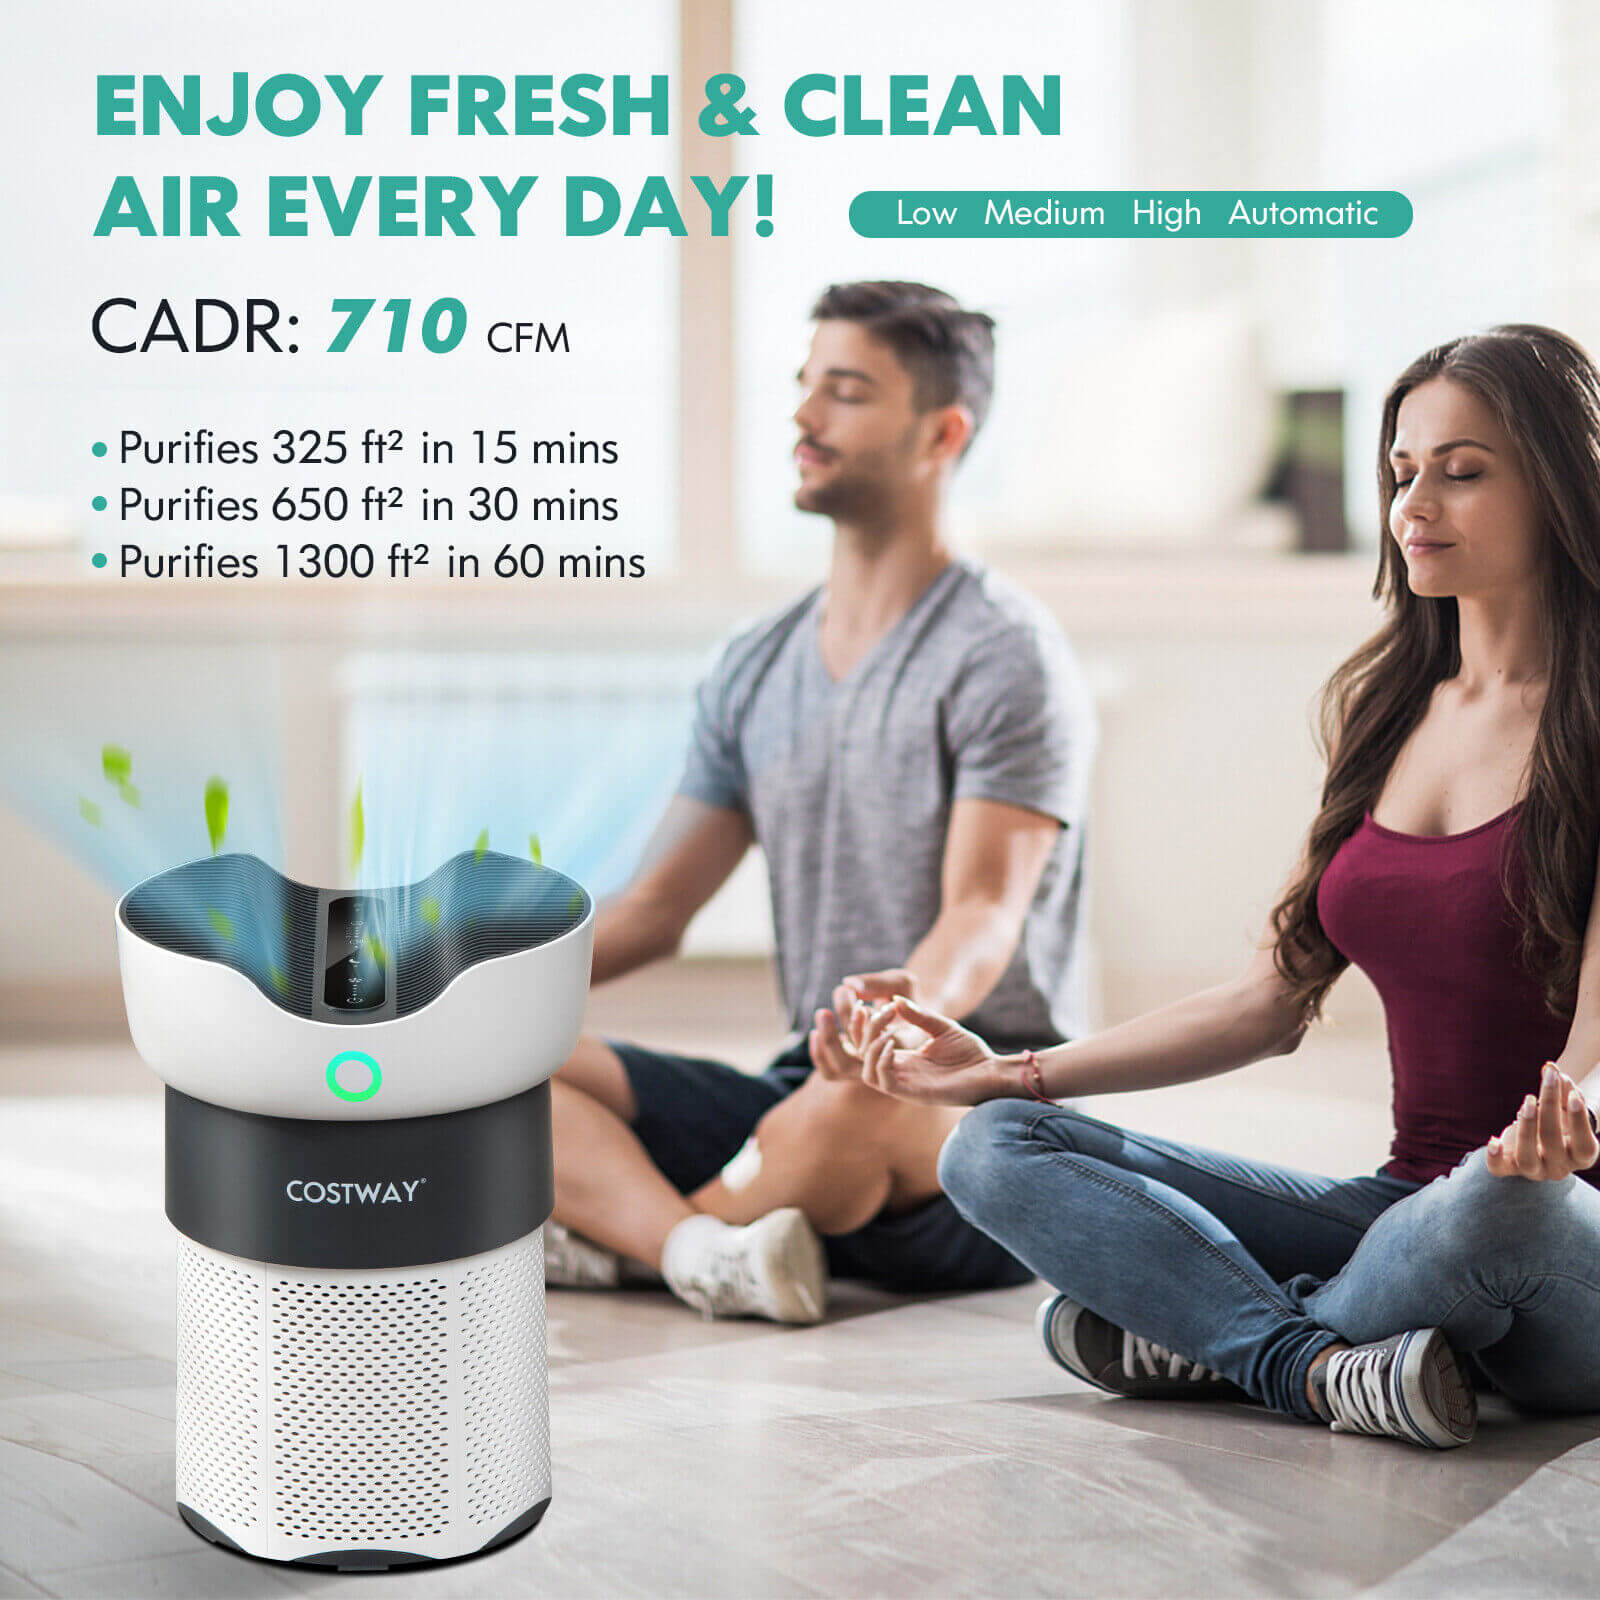 Enjoy Clean and Healthy Air Anywhere: This air purifier is convenient to place and easy to move around. It occupies minimal floor space, making it suitable for various settings such as living rooms, study rooms, bedrooms, kitchens, pet shops, laboratories, restaurants, offices, and more.